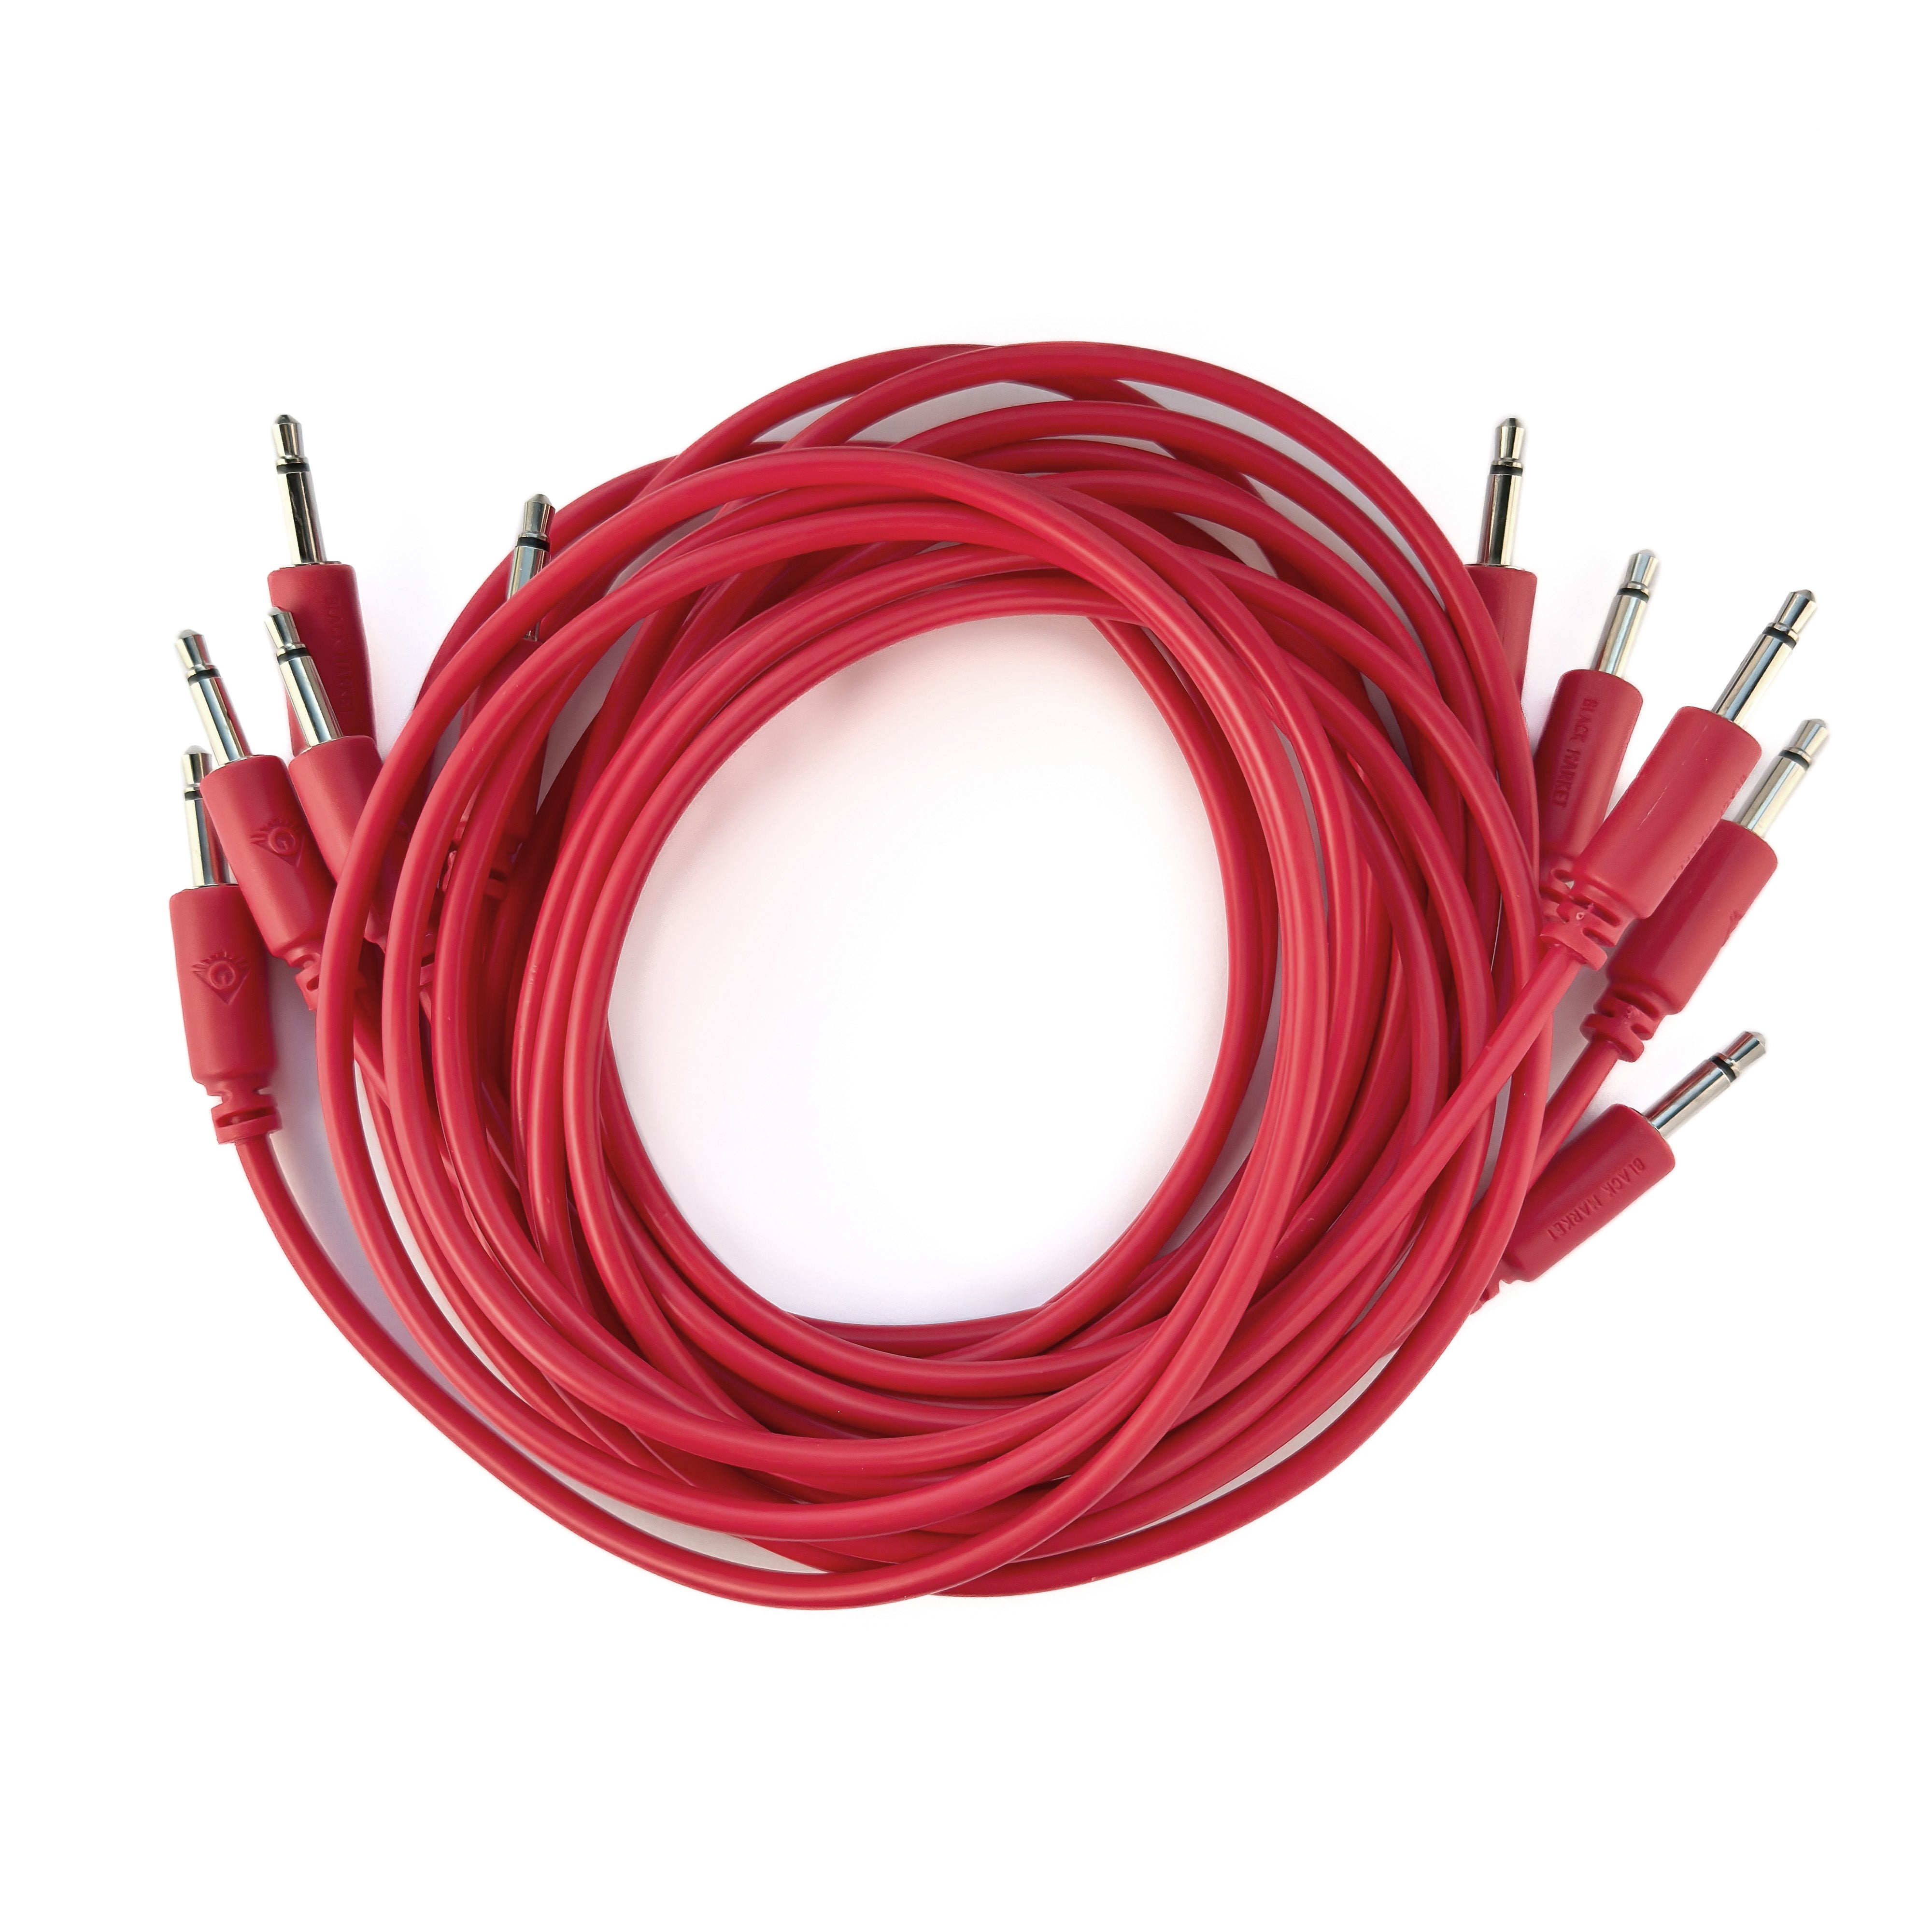 Black Market Modular 3.5mm Patch Cable 5-Pack - 100cm/40" - Red View 1